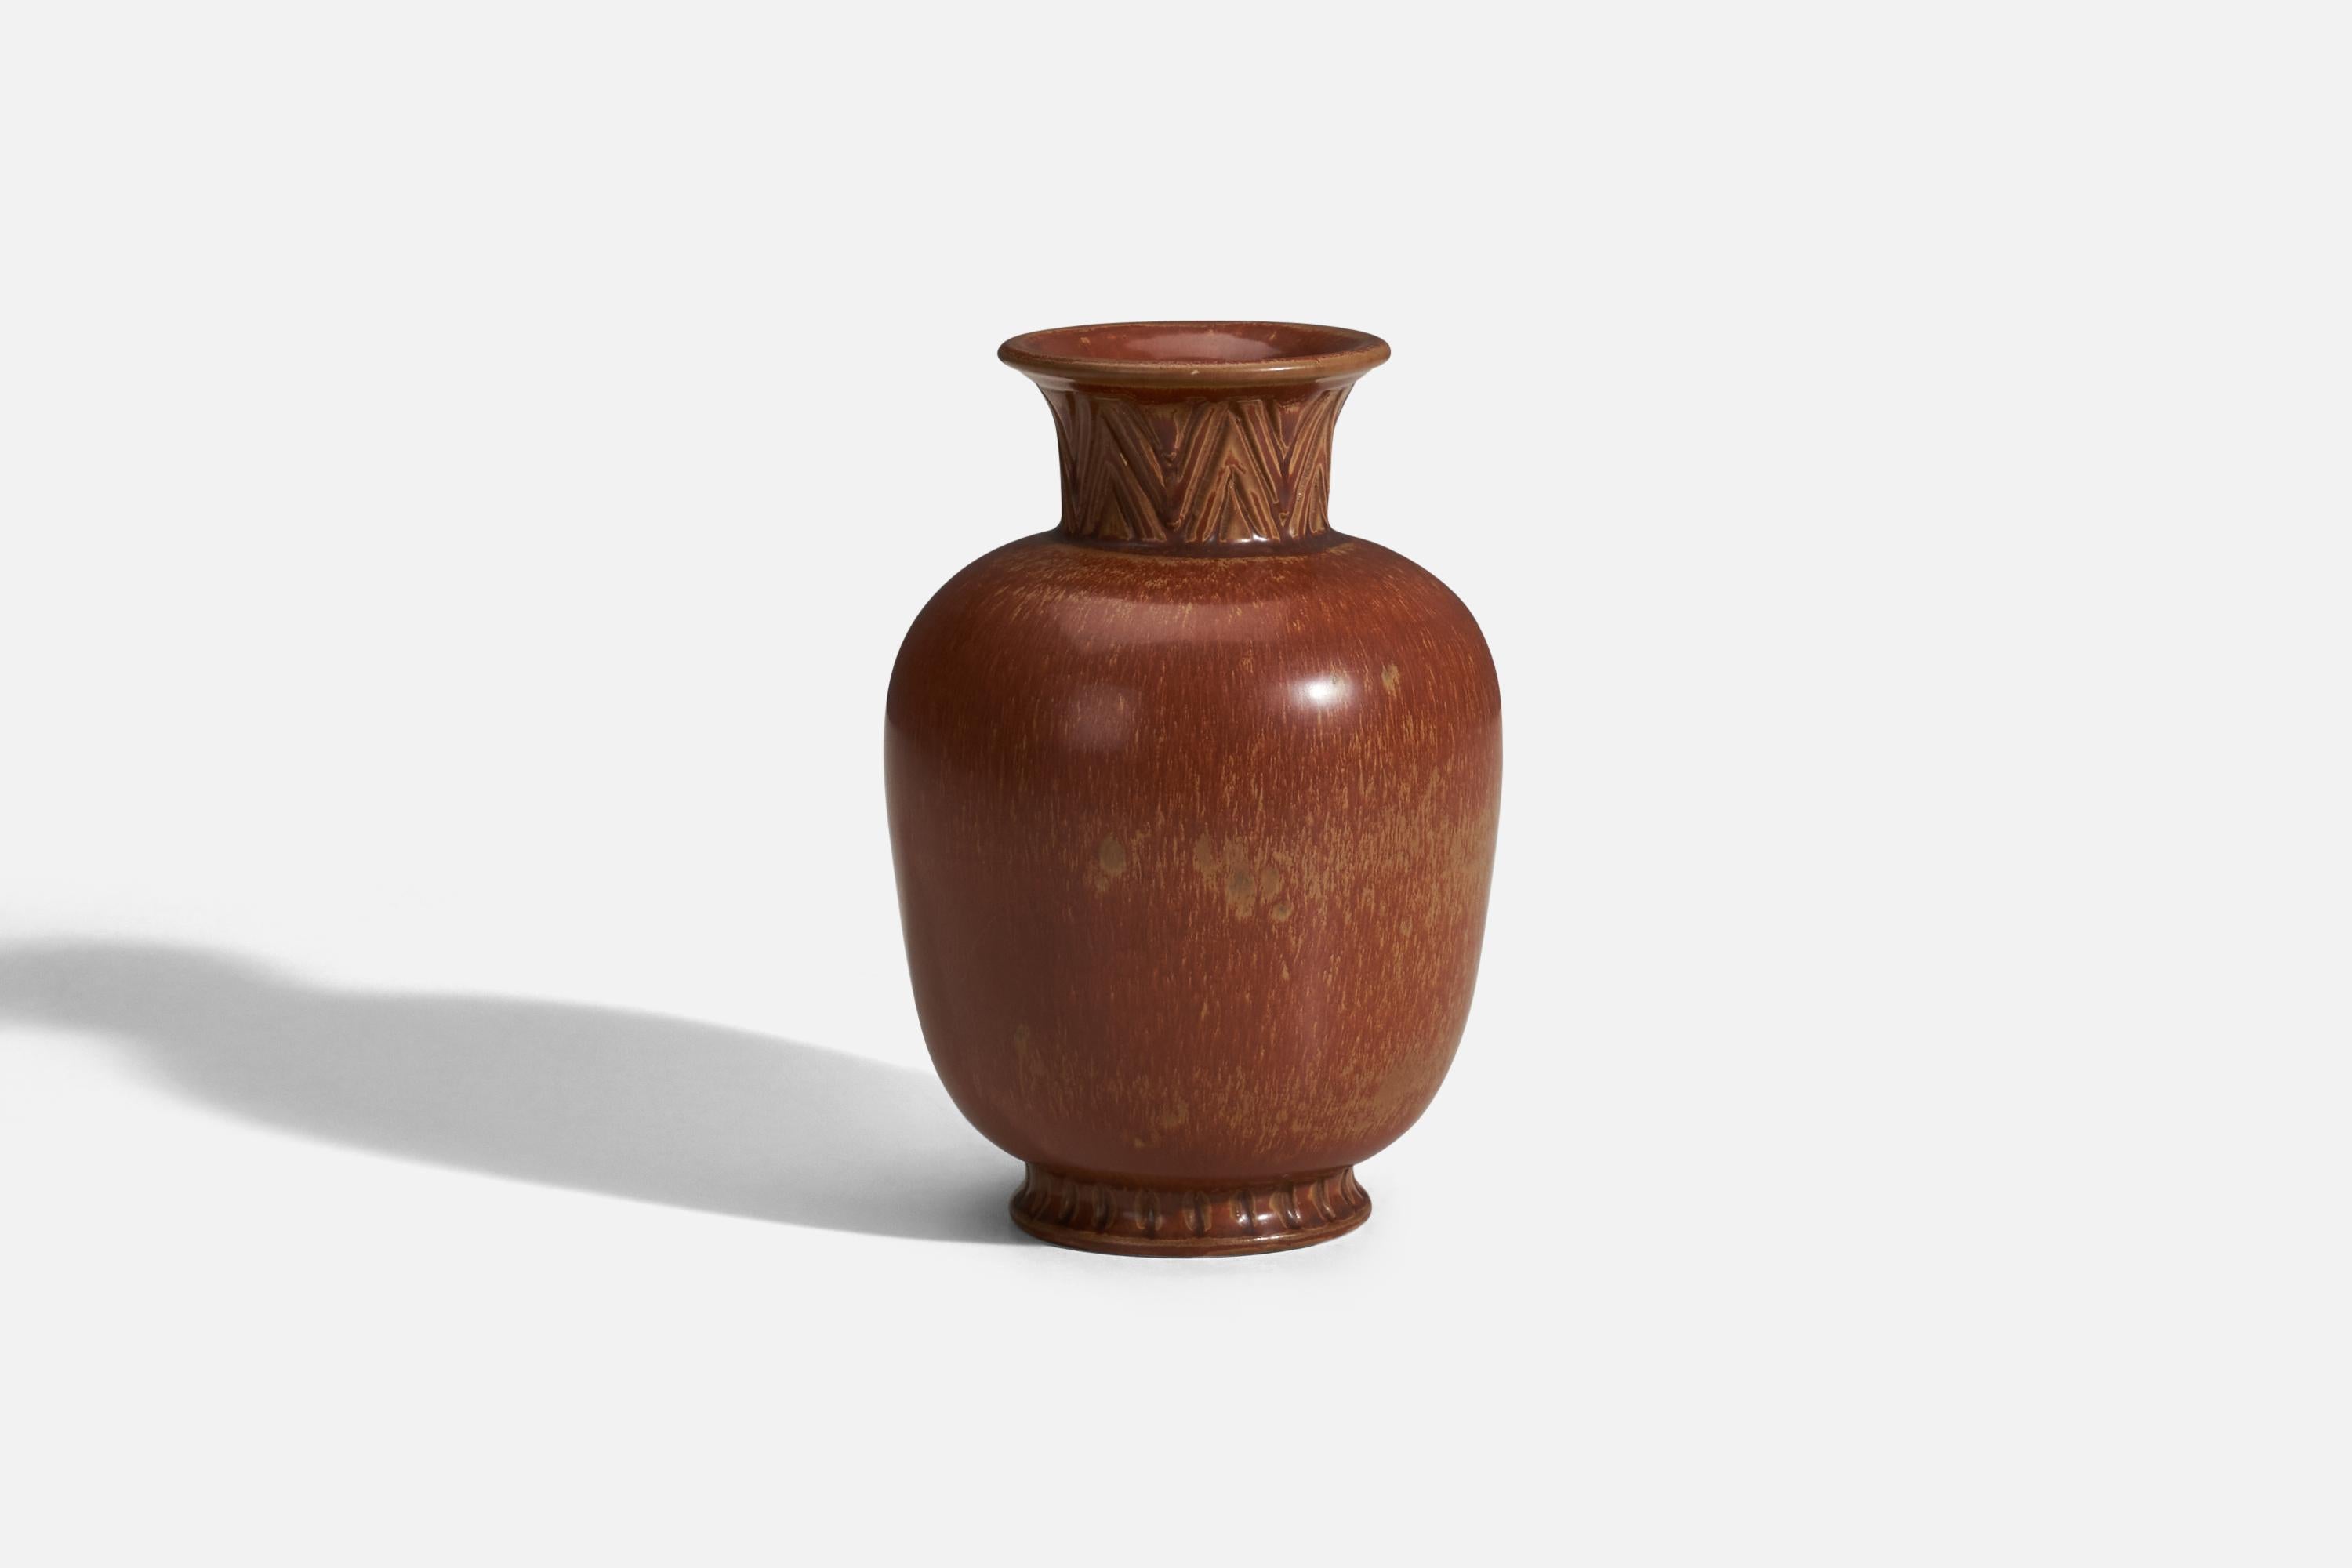 A brown glazed stoneware vase designed by Gunnar Nylund and produced by Rörstrand, Sweden, 1940s.